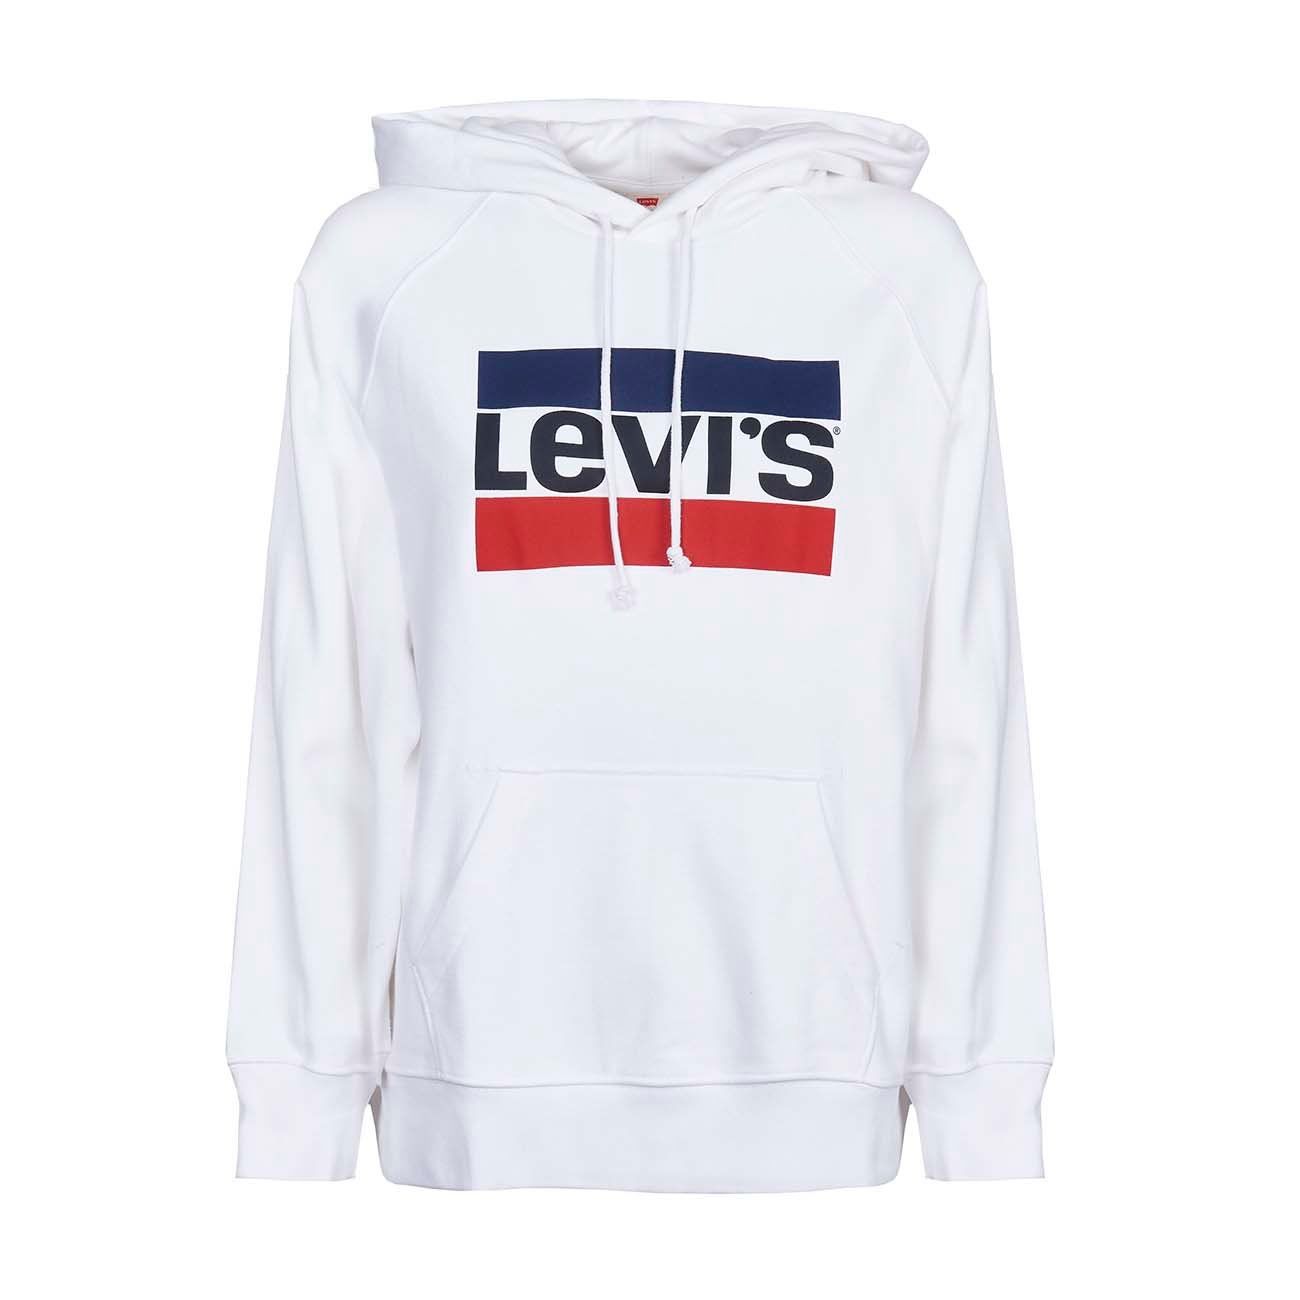 levi's red white blue hoodie